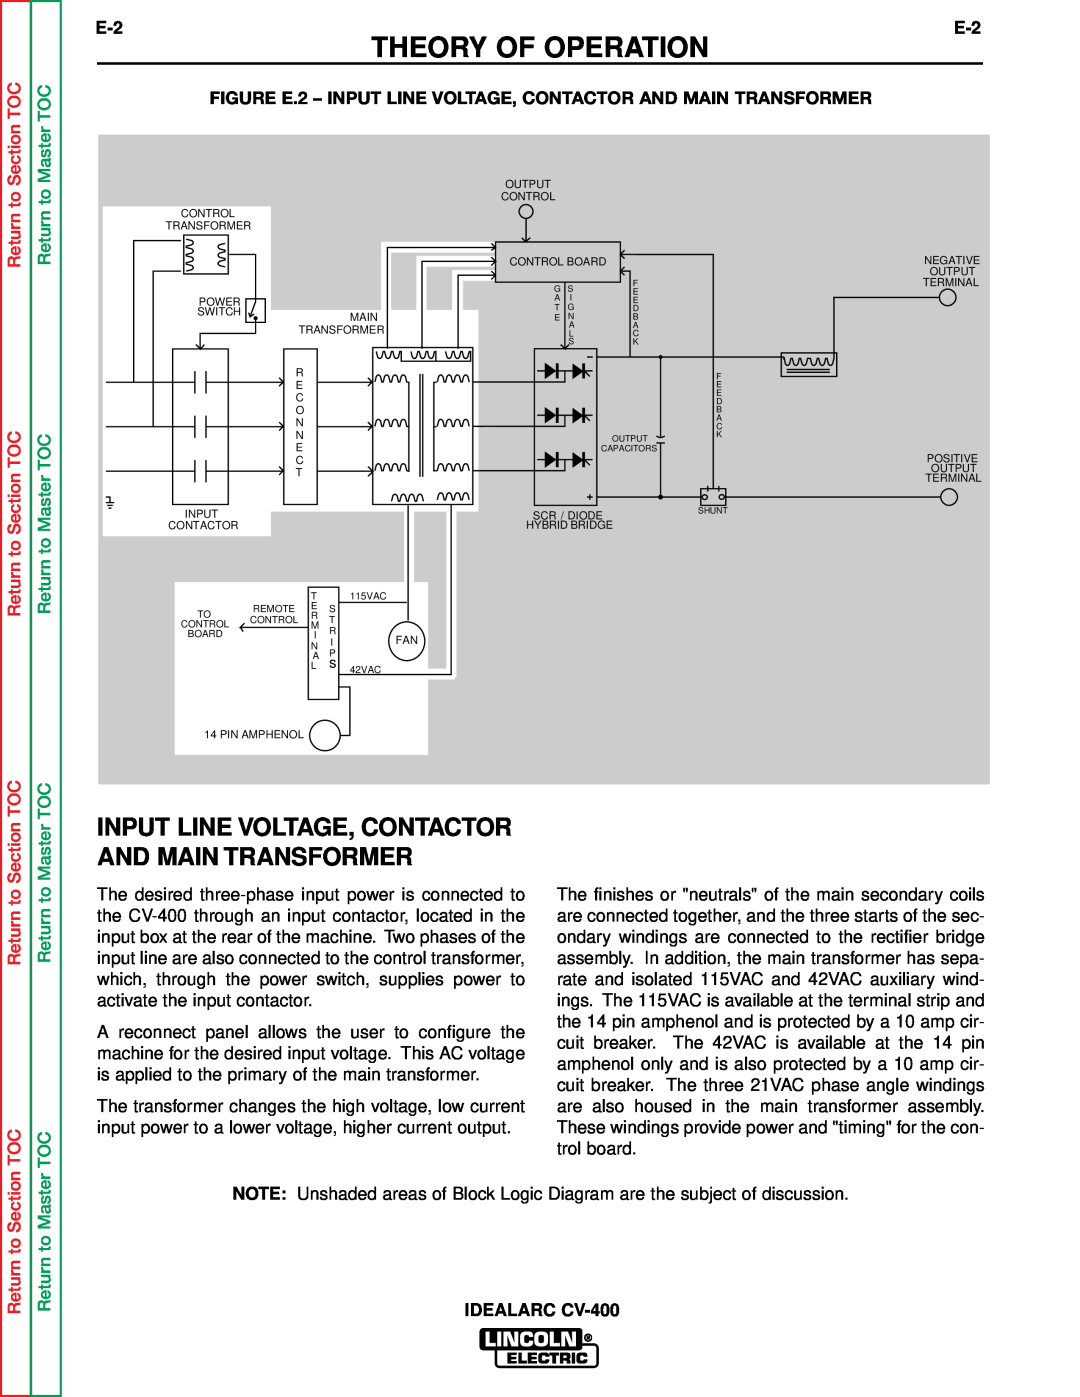 Lincoln Electric SVM136-A Theory Of Operation, Input Line Voltage, Contactor And Main Transformer, Section TOC, Master TOC 